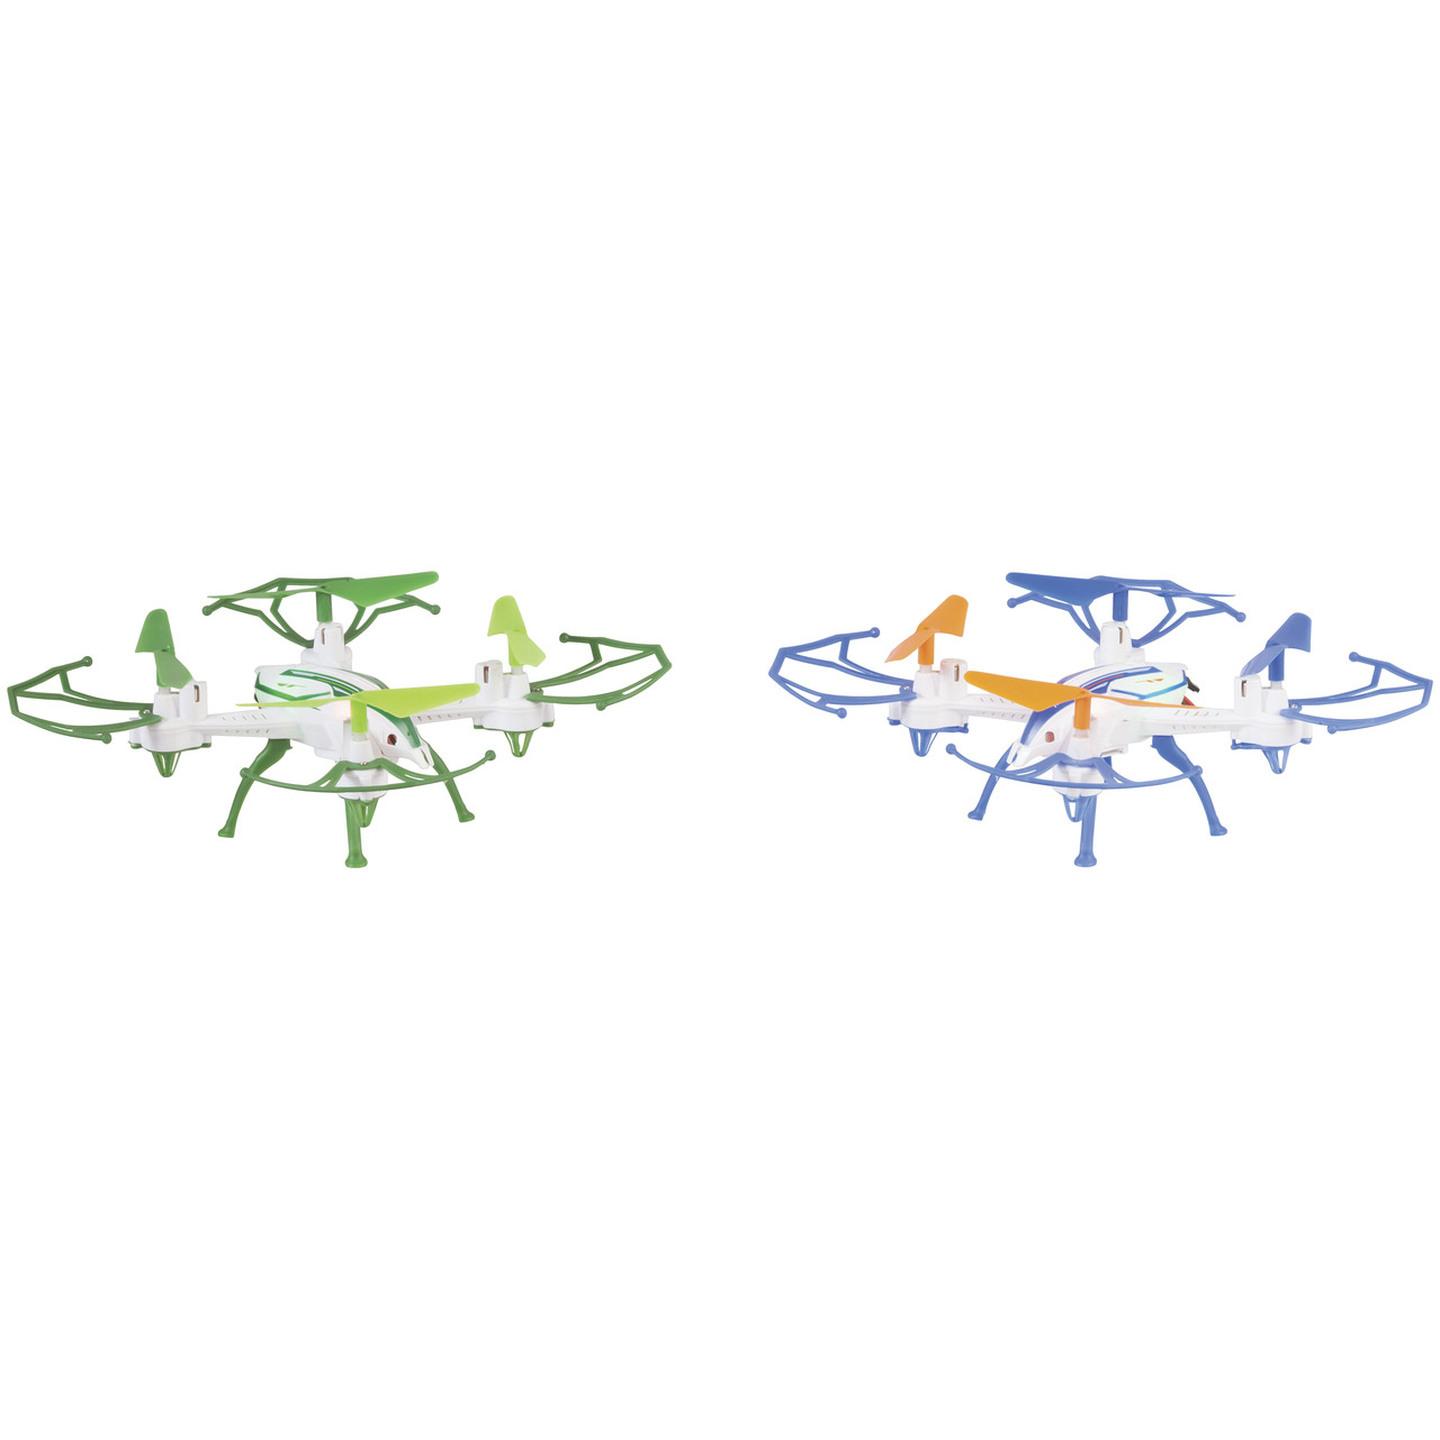 SKY FIGHTER RC Battle Quadcopters - Pair